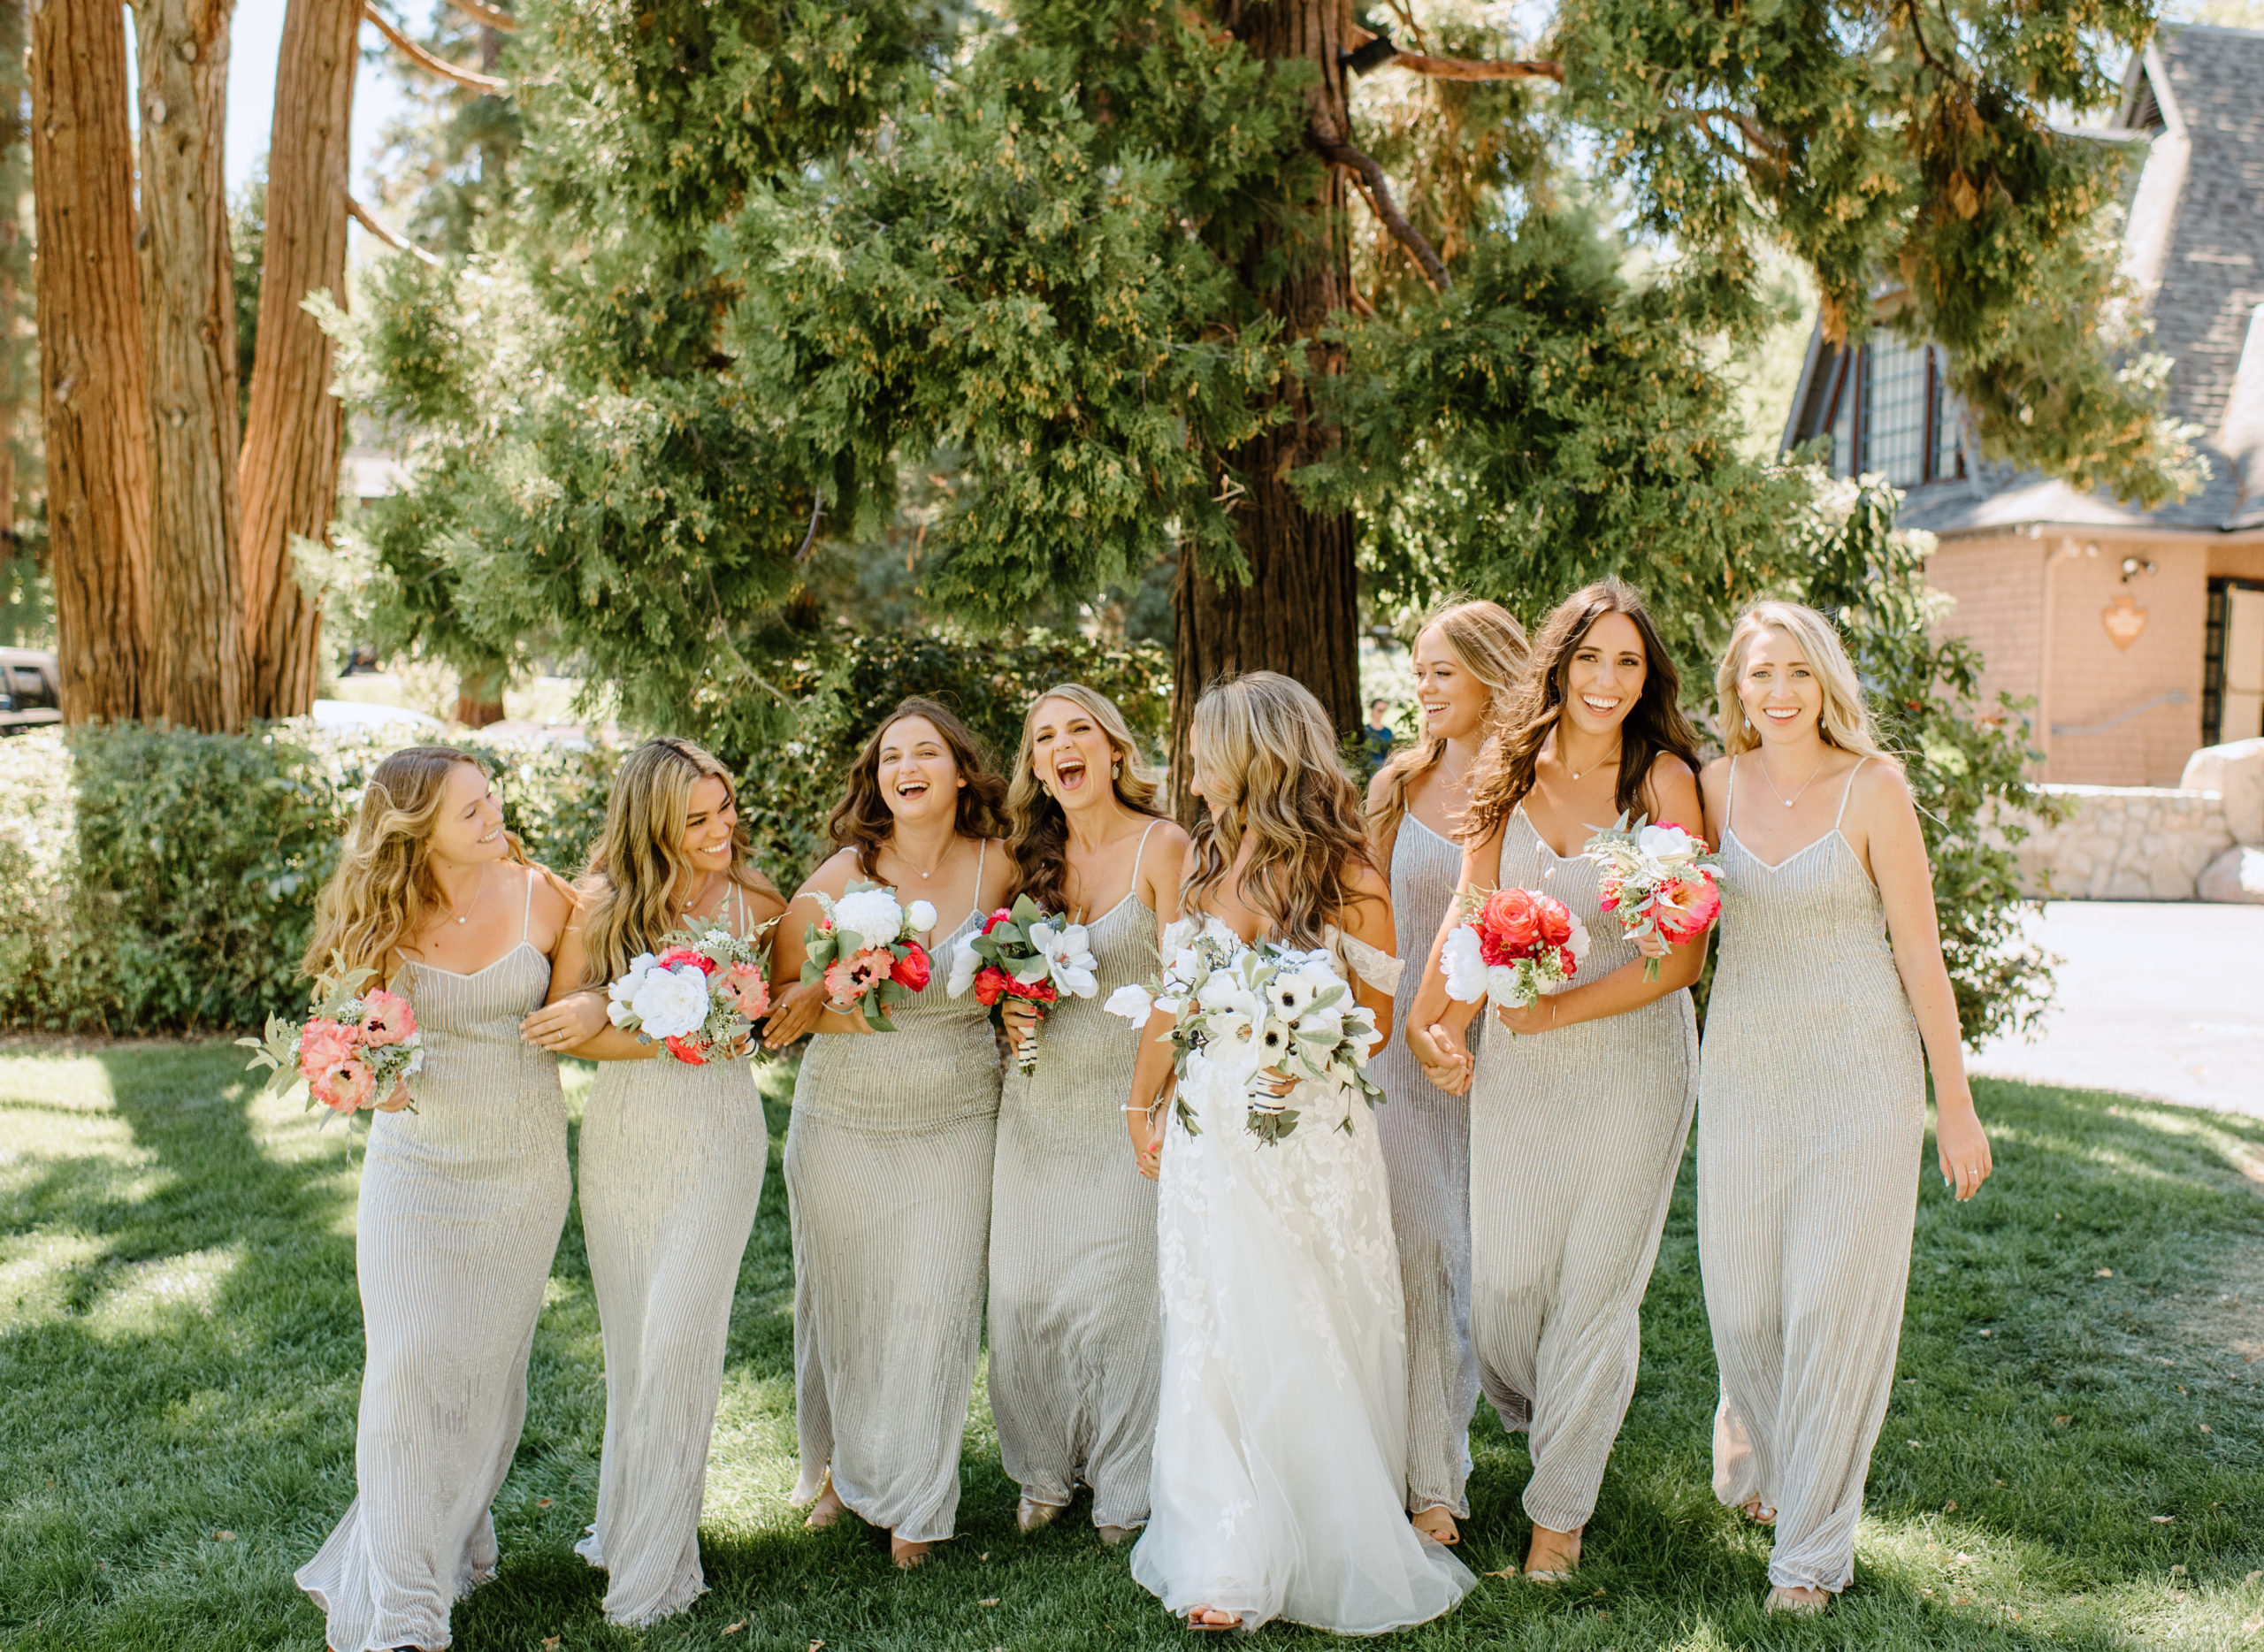 The bride and her bridesmaids at the Lake Arrowhead wedding